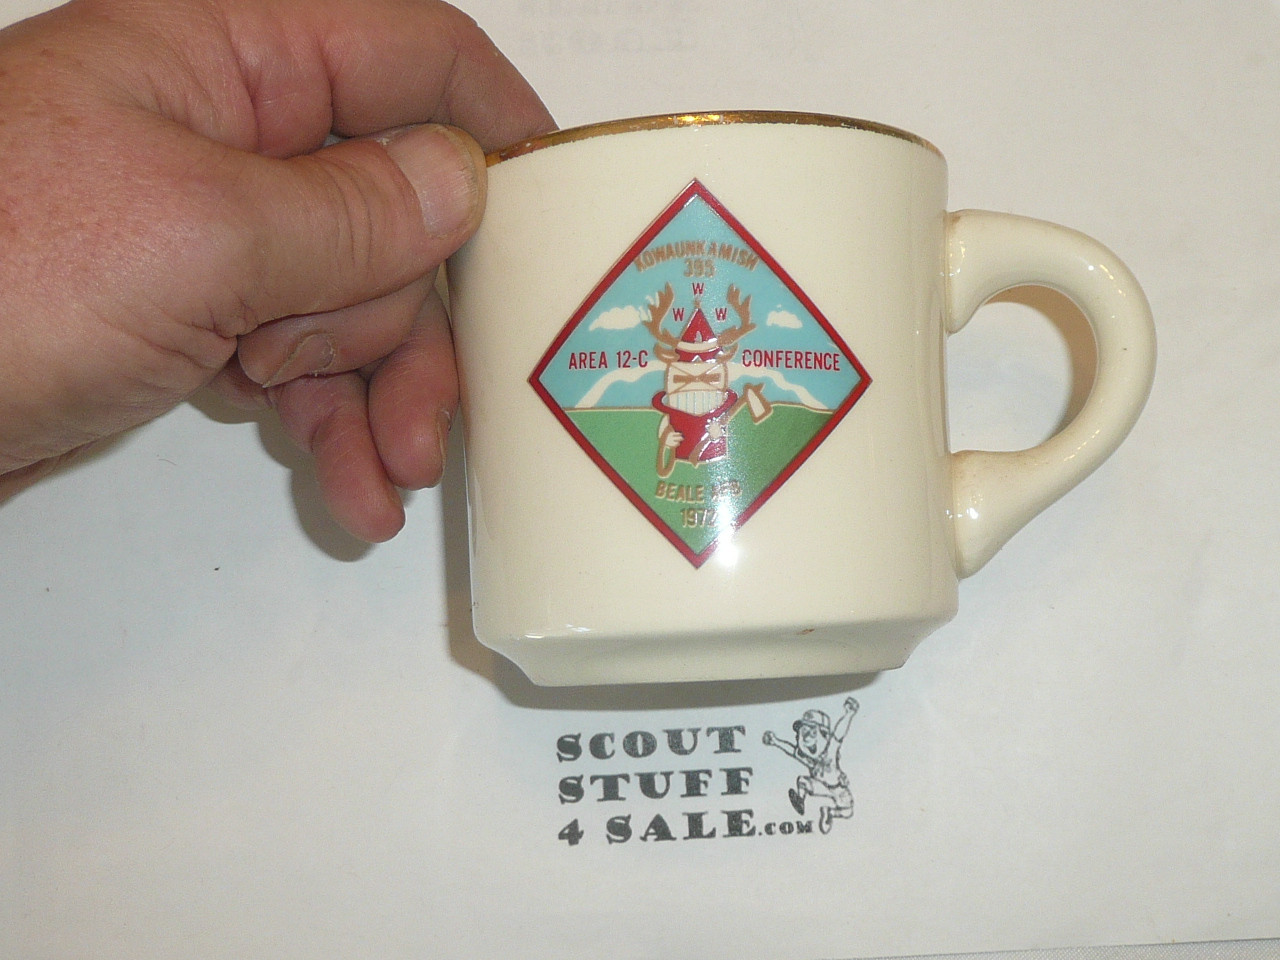 1972 Order of the Arrow Area 12C Conference Mug